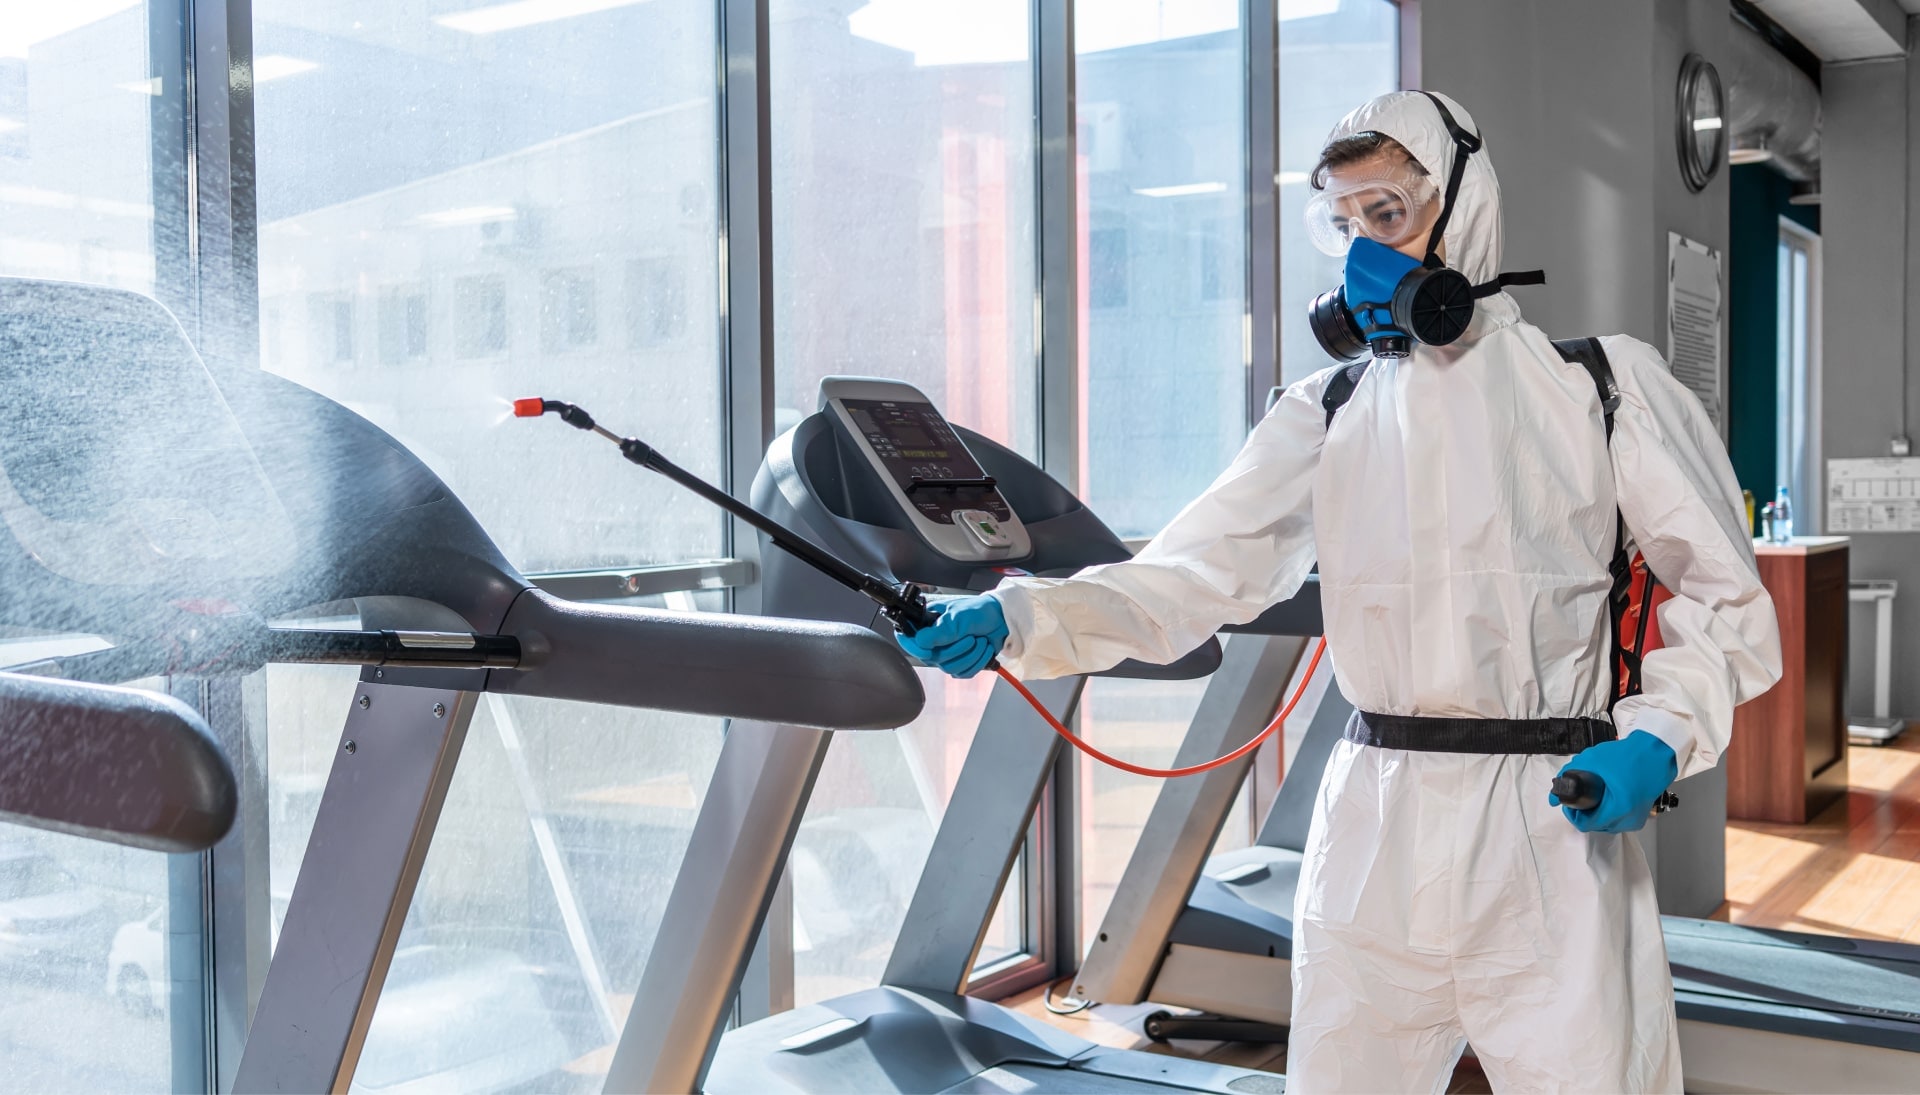 For commercial mold removal, we use the latest technology to identify and eliminate mold damage in Bellevue, Washington.